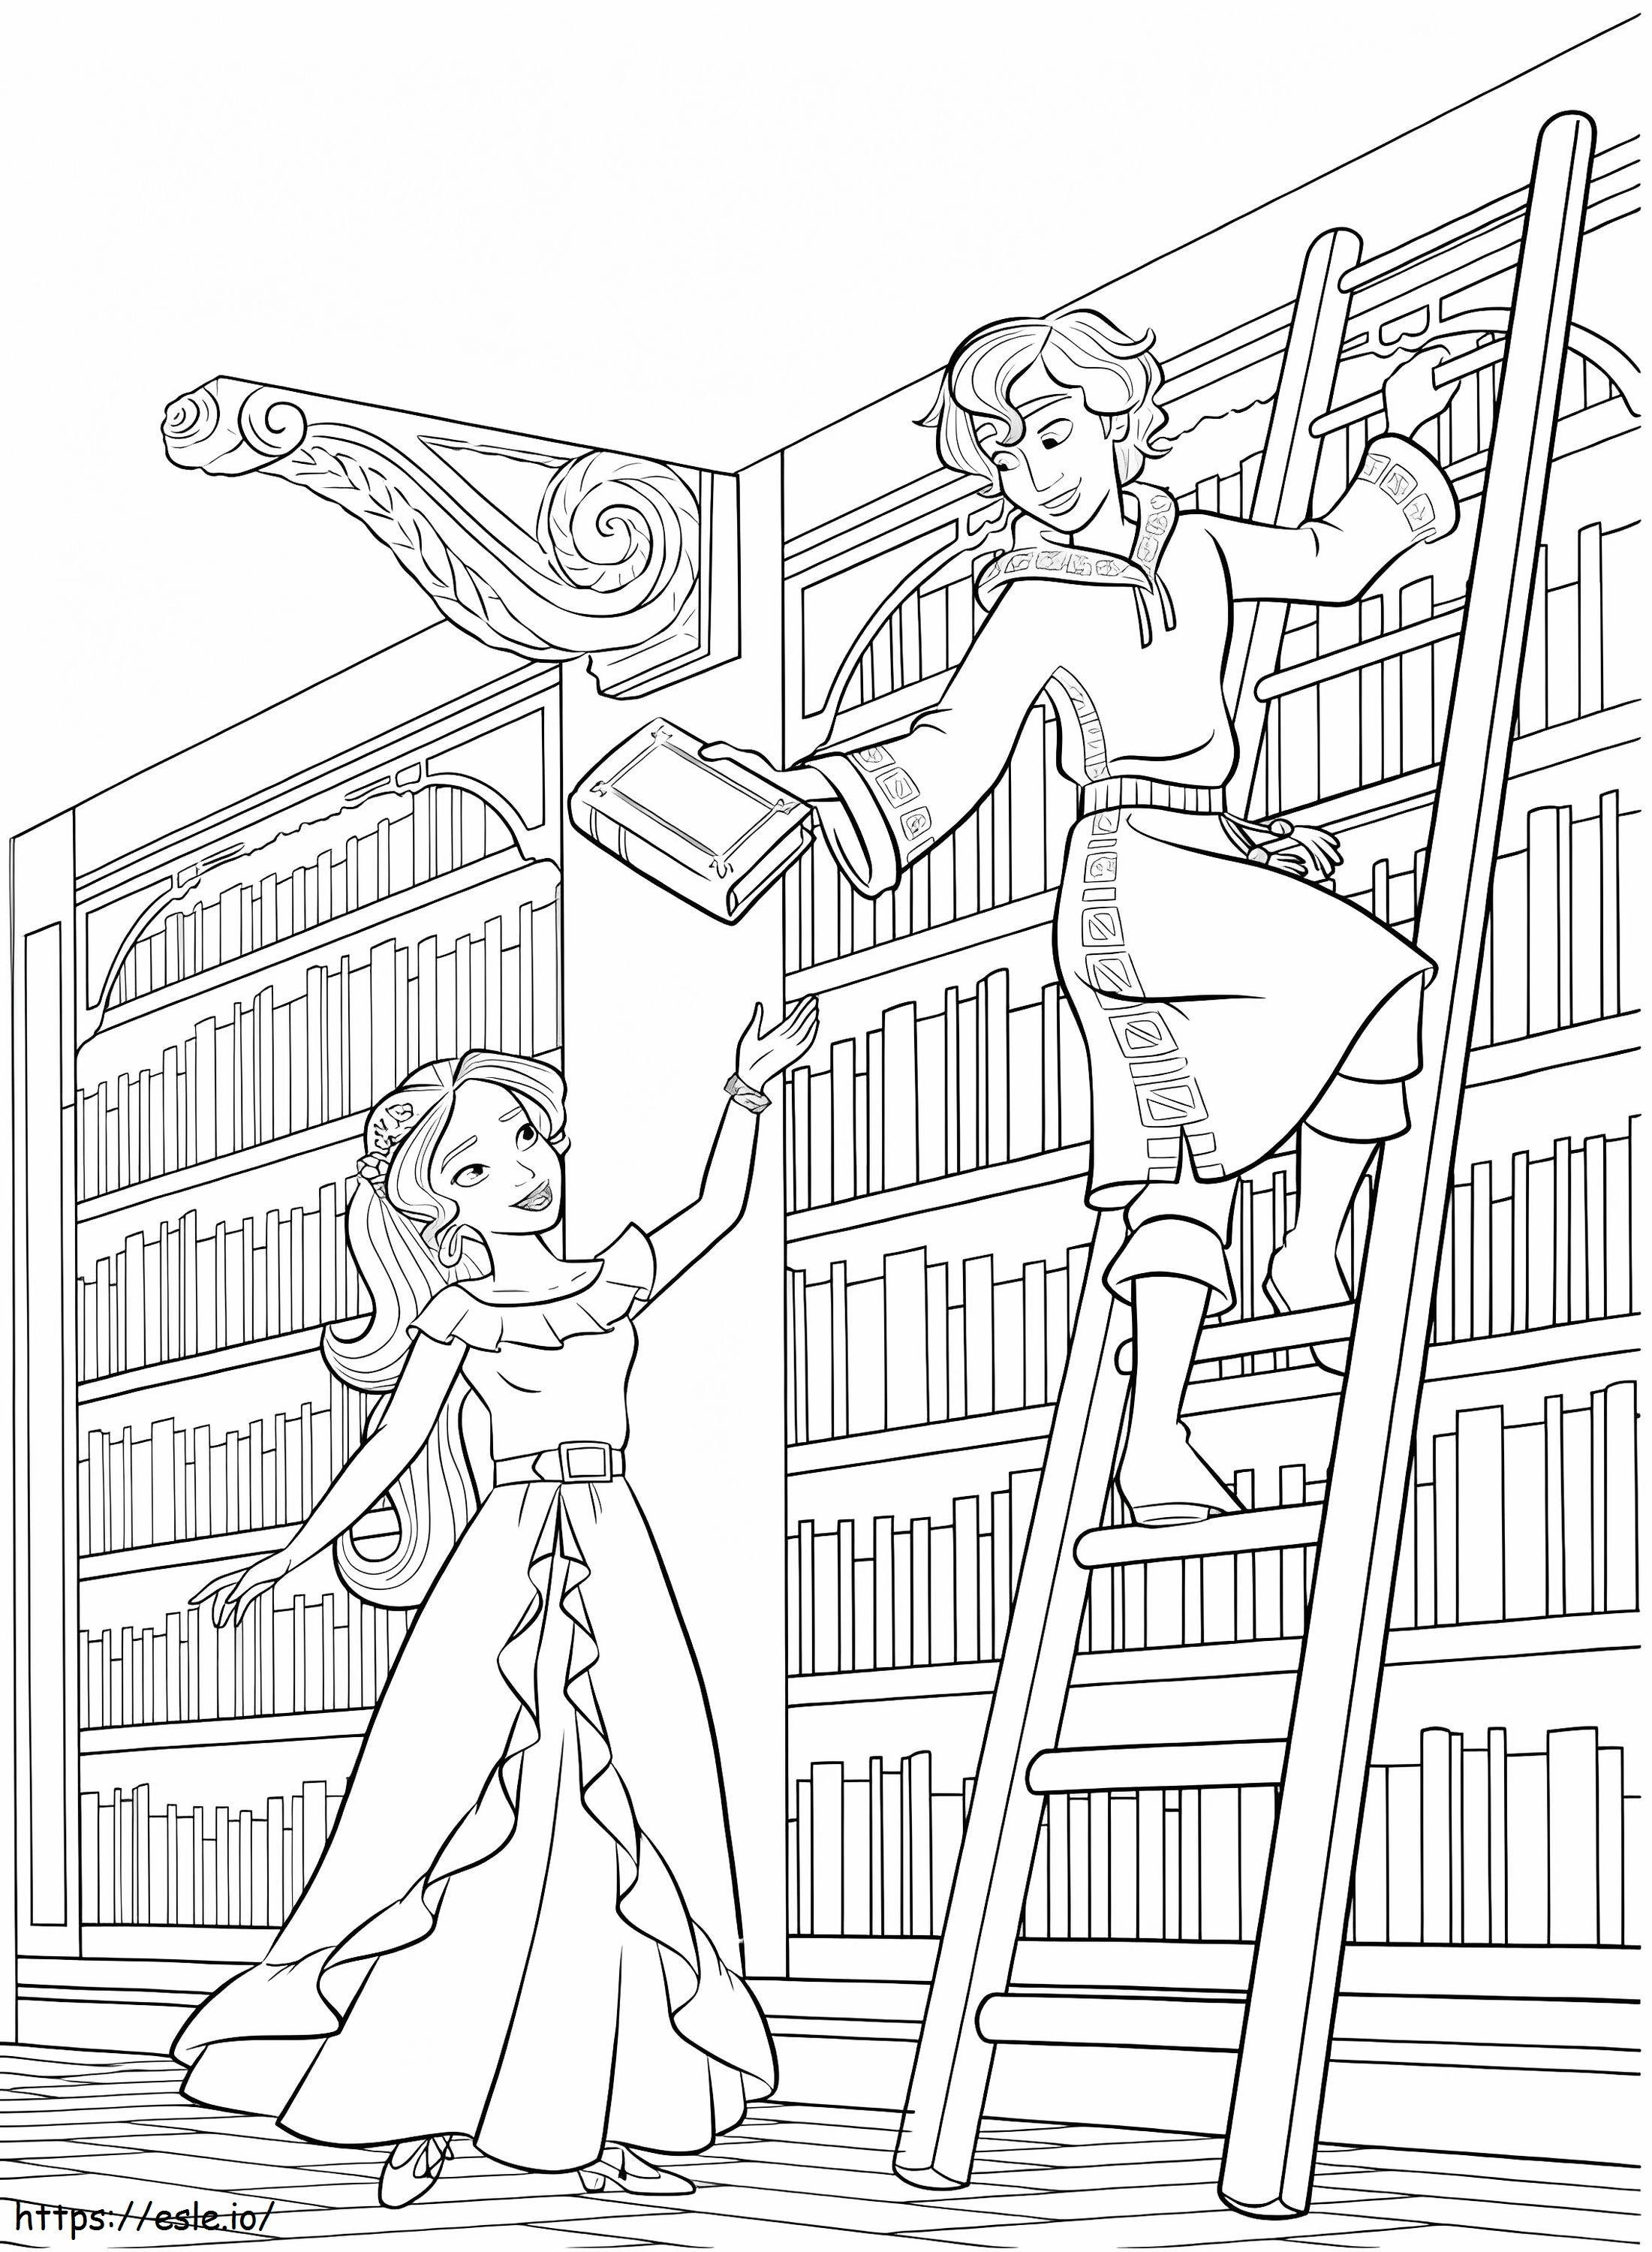 1535077537 Elena Mateo In Library A4 coloring page